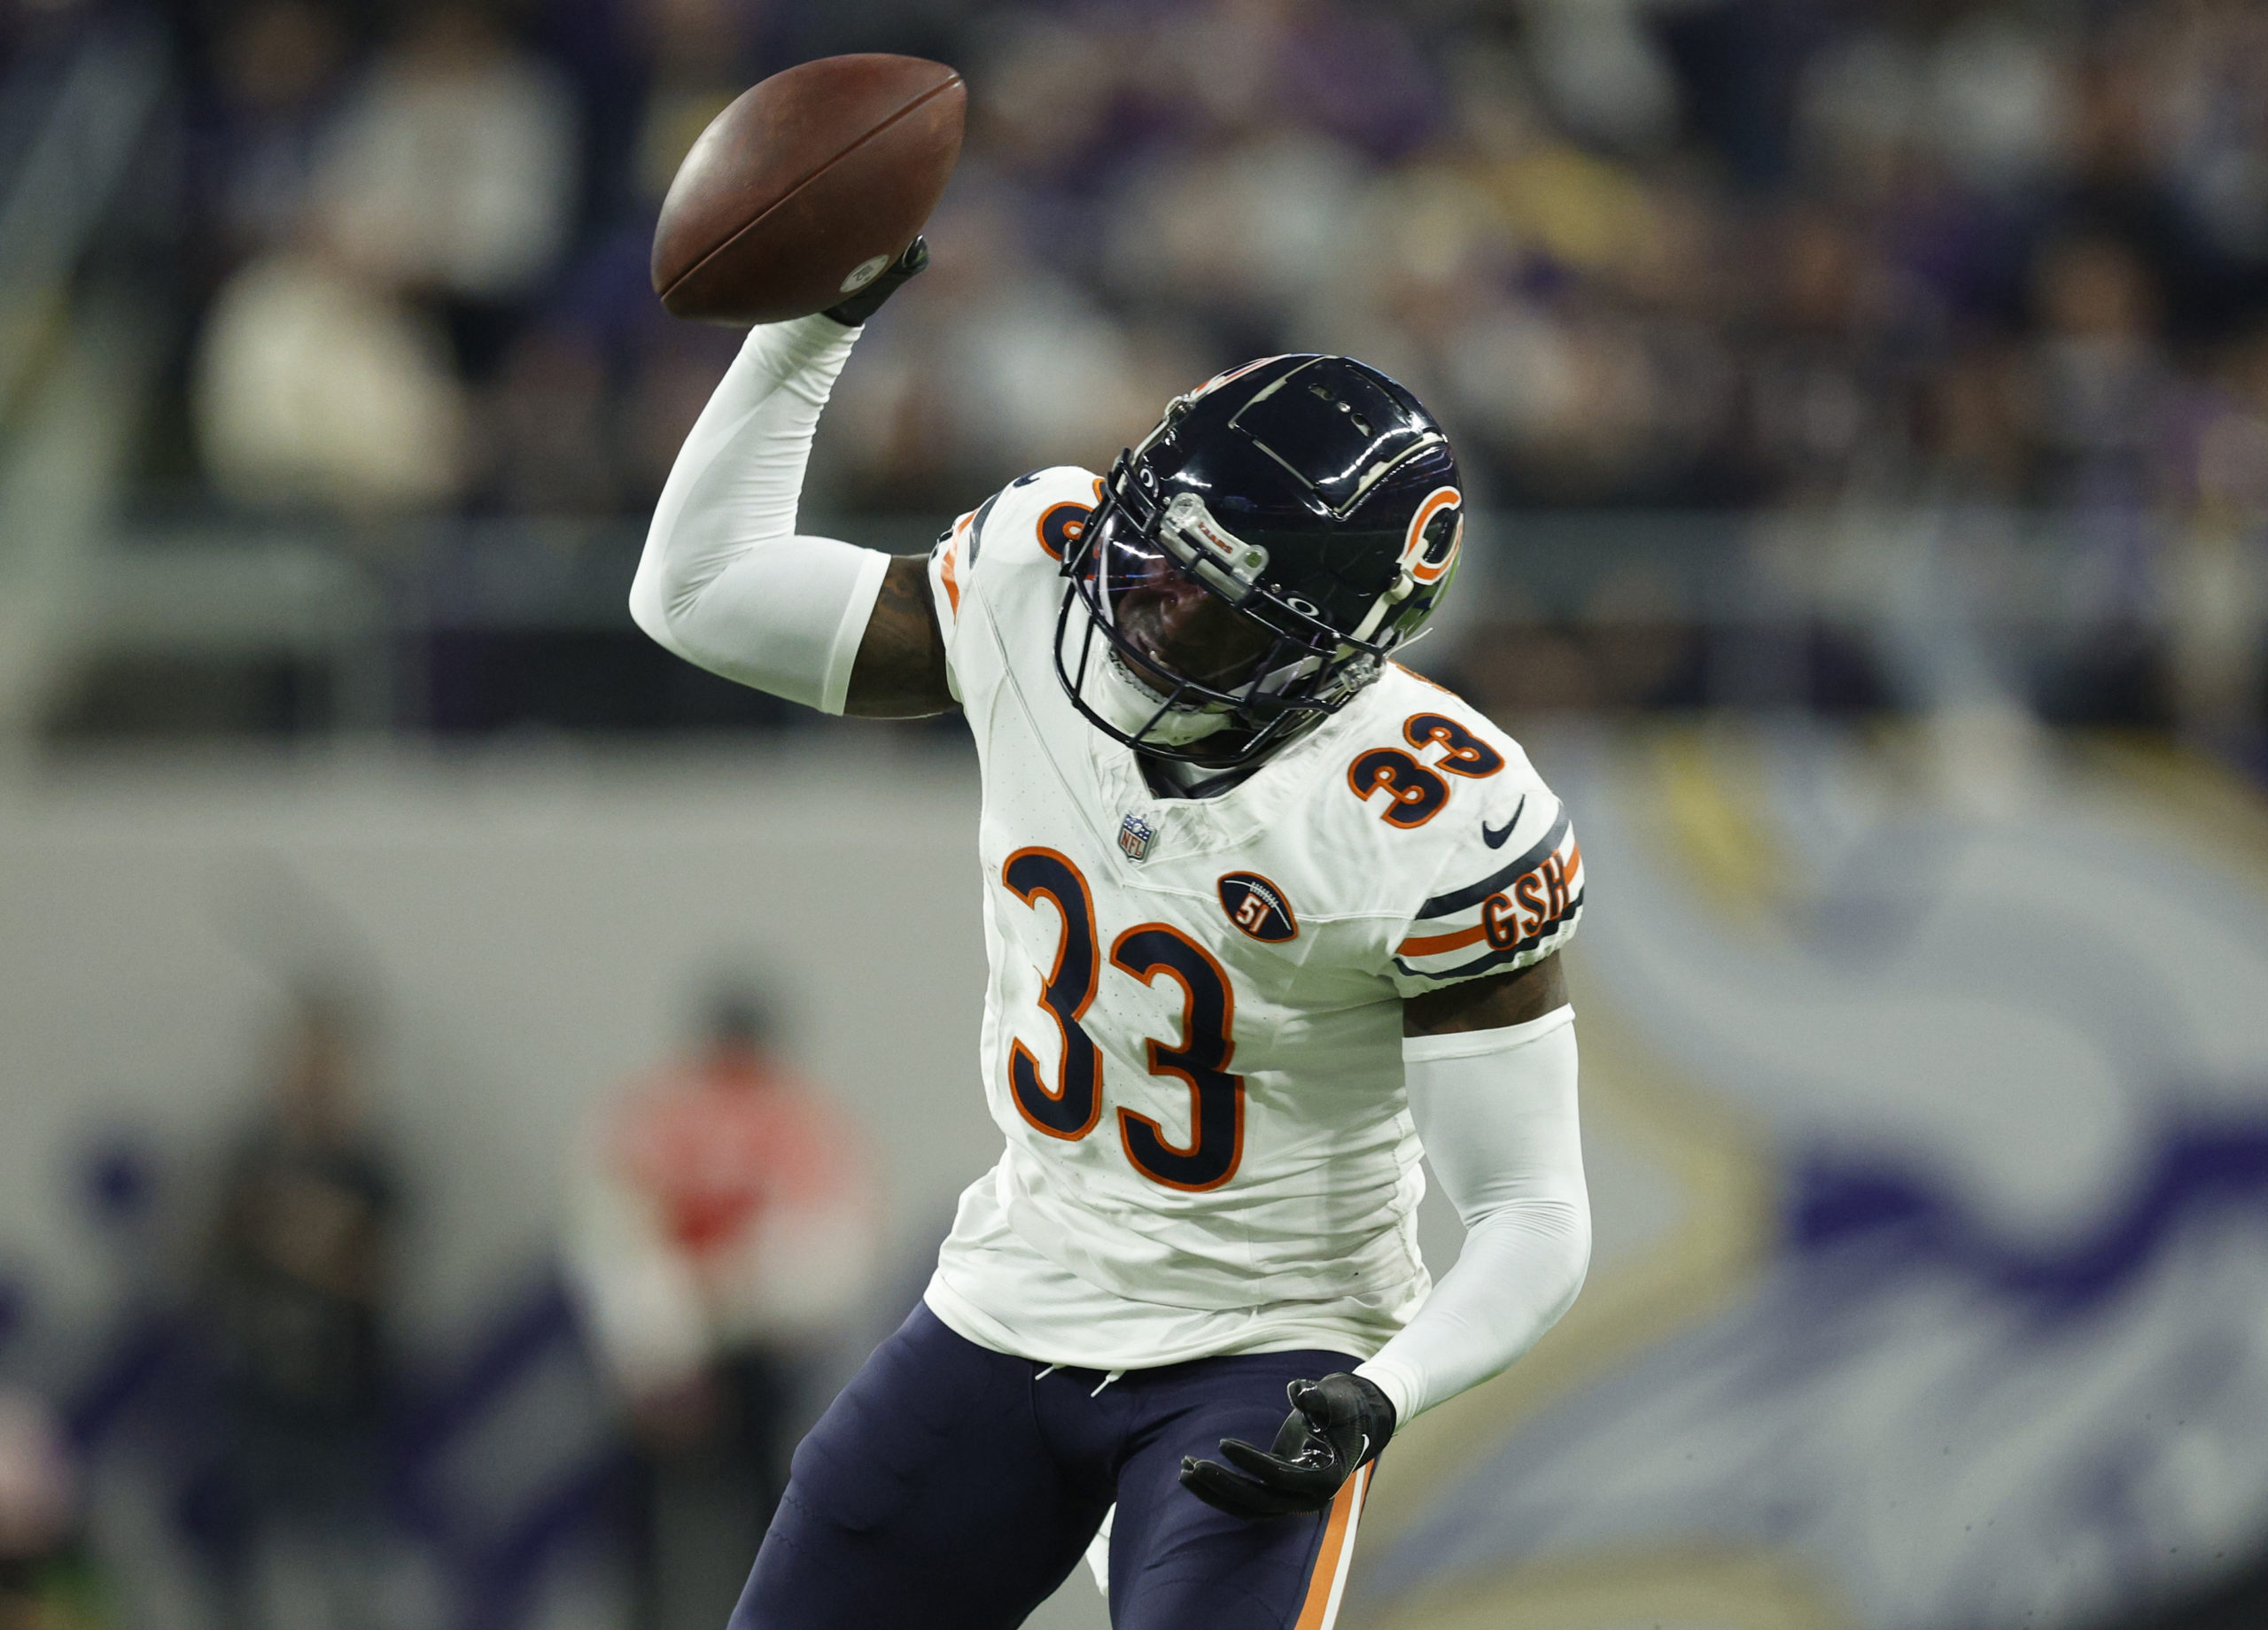 MINNEAPOLIS, MINNESOTA - NOVEMBER 27: Jaylon Johnson #33 of the Chicago Bears reacts after nearly intercepting a pass during the second quarter against the Minnesota Vikings at U.S. Bank Stadium on November 27, 2023 in Minneapolis, Minnesota. David Berding/Getty Images